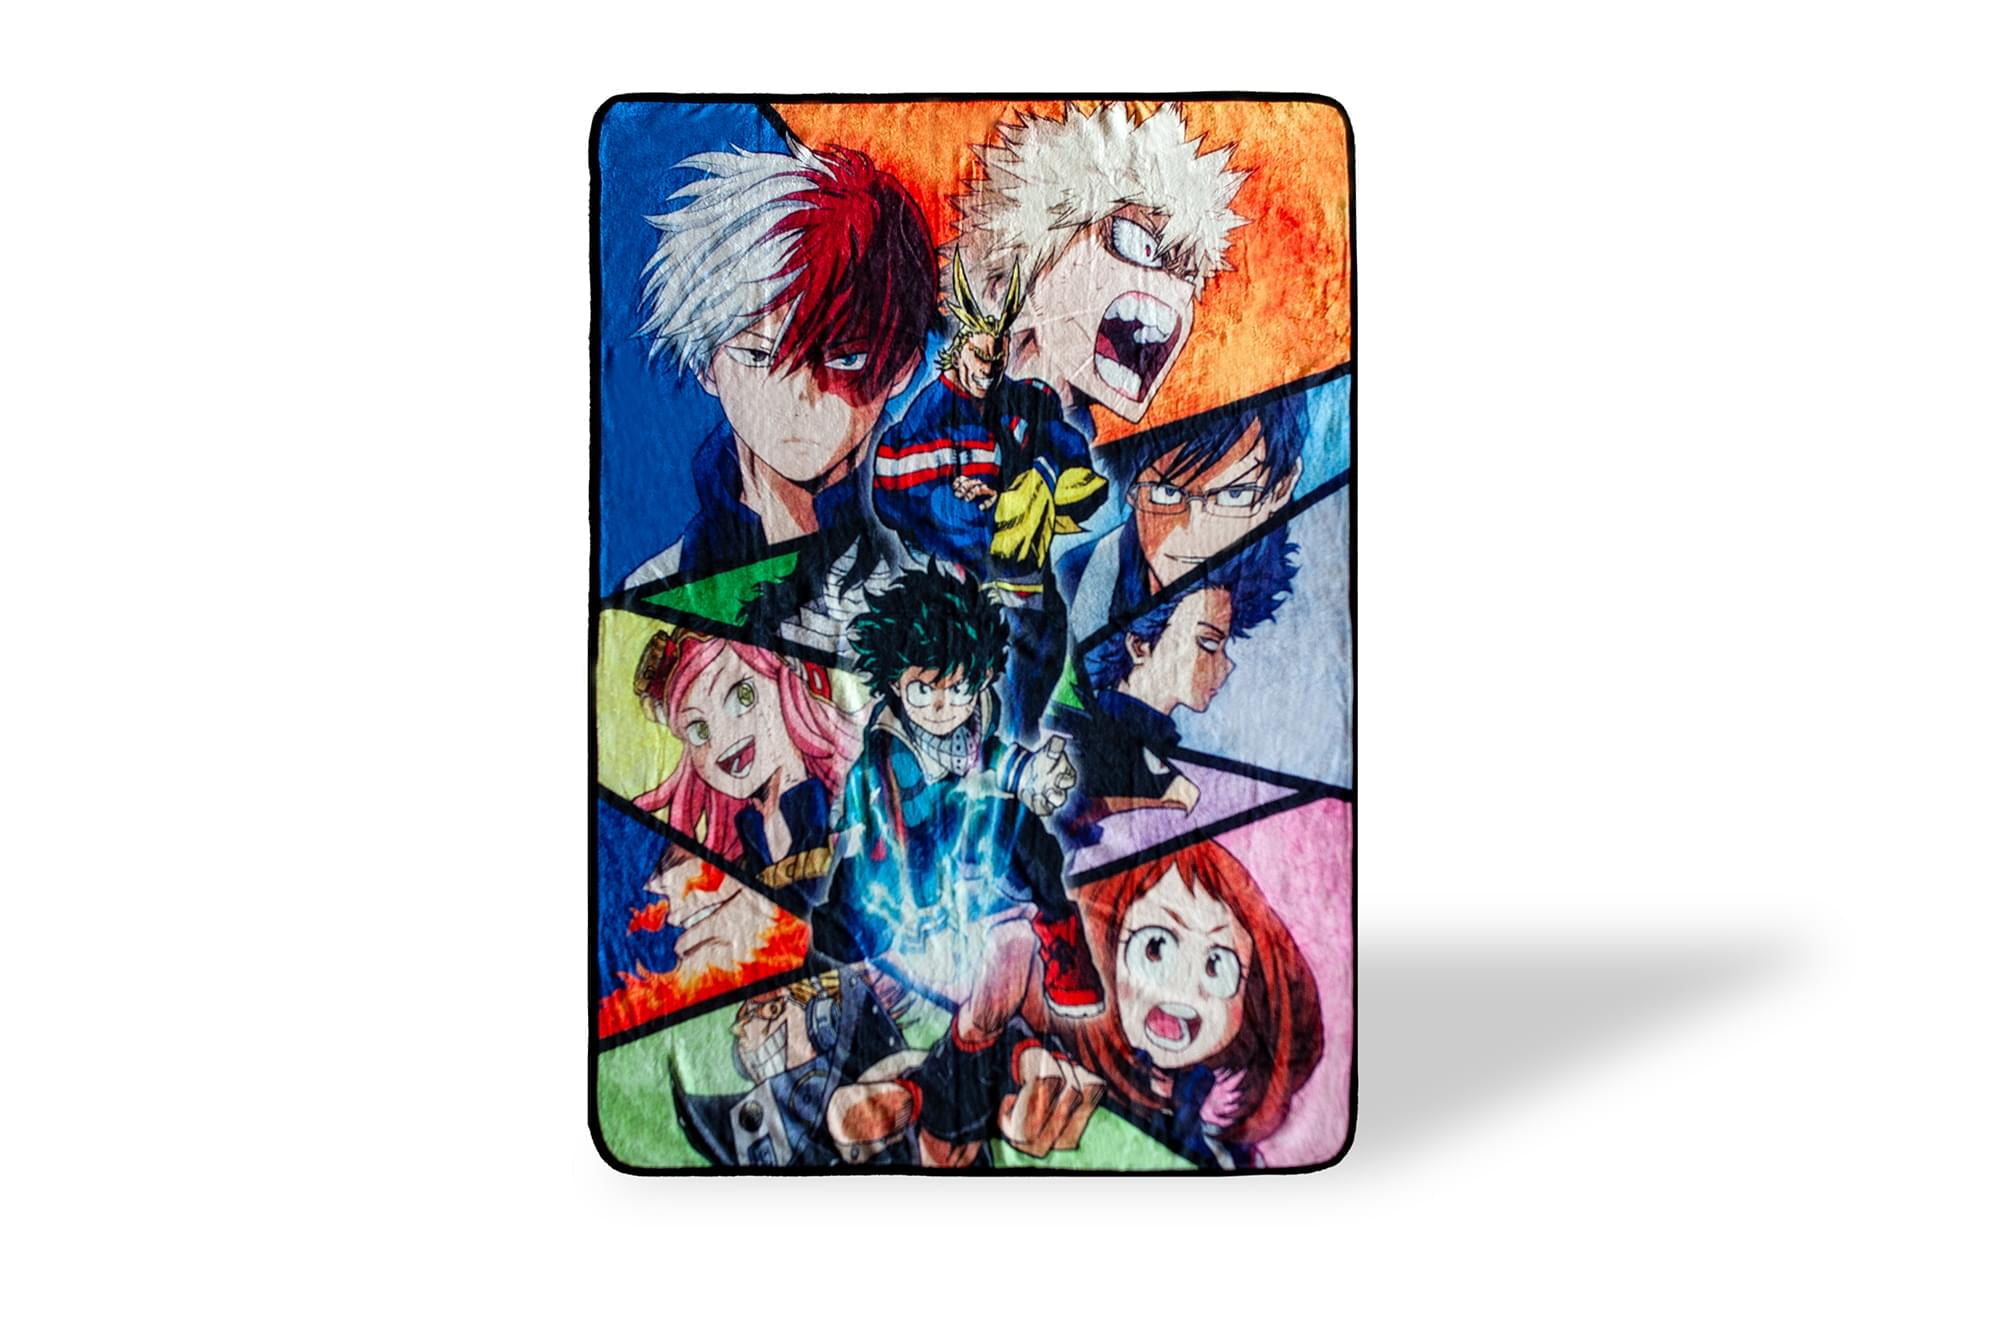 S 50x40 ZZPHH My Hero Academia Collage Anime Hawks Manga Fleece Throw Blanket Fuzzy Warm Throws for Winter Bedding 48x60IN Couch and Plush House Warming Decor Gift Idea